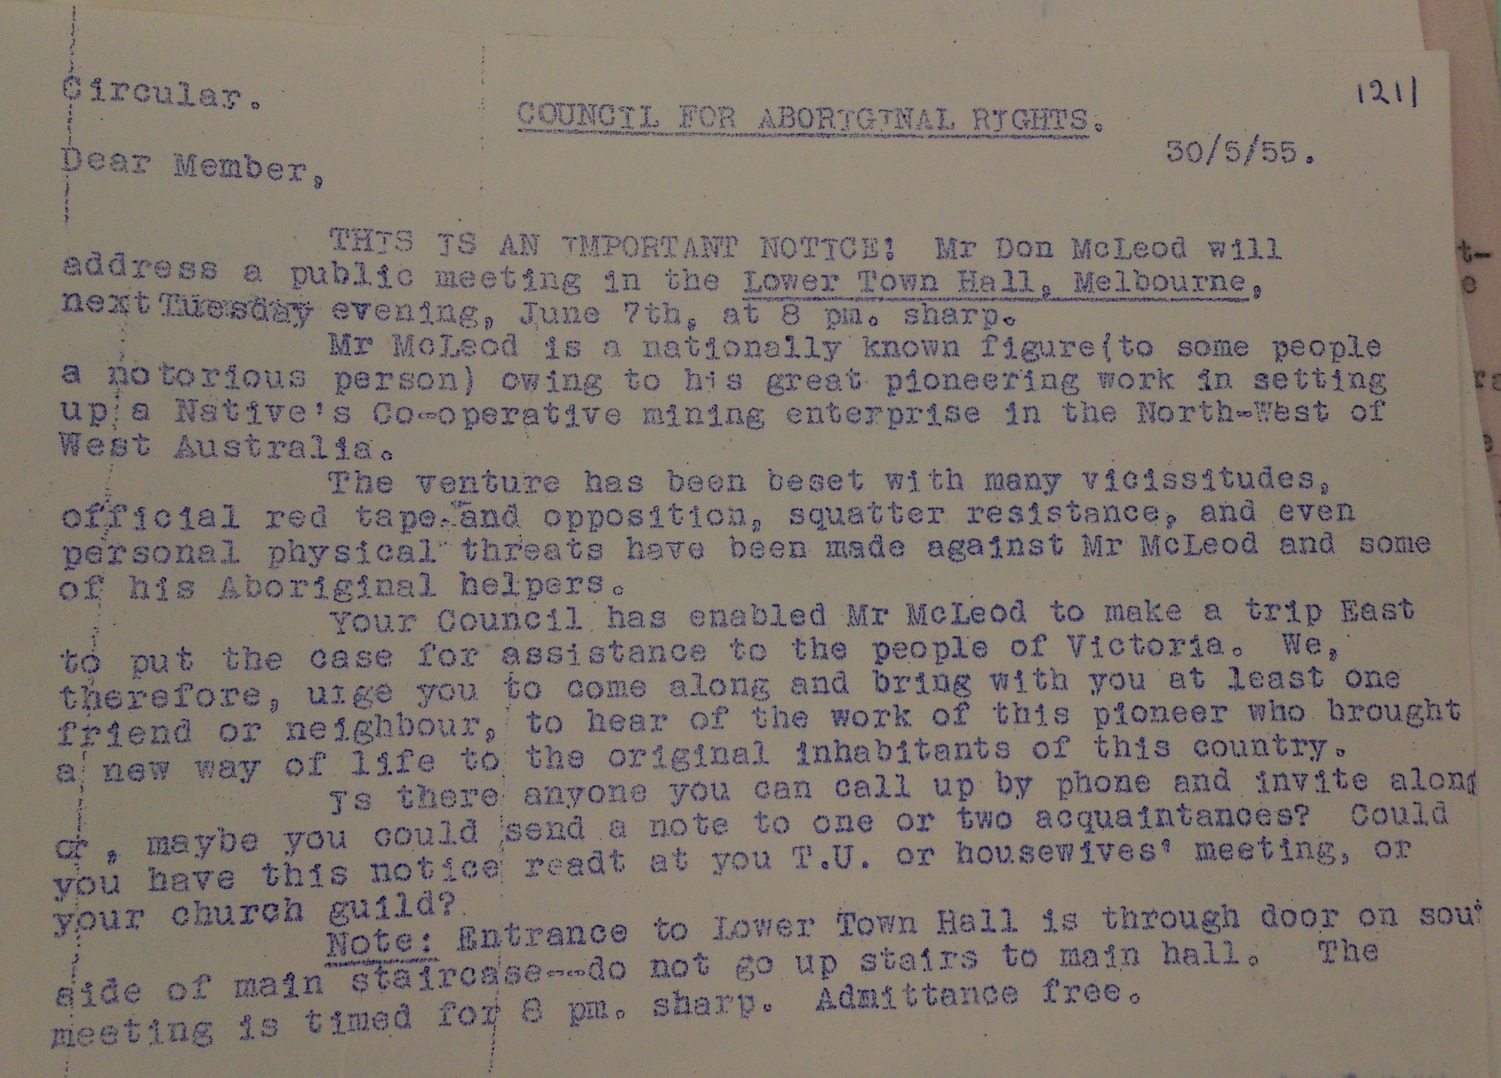 Circular for McLeod's Public Appearance on 1955 Tour